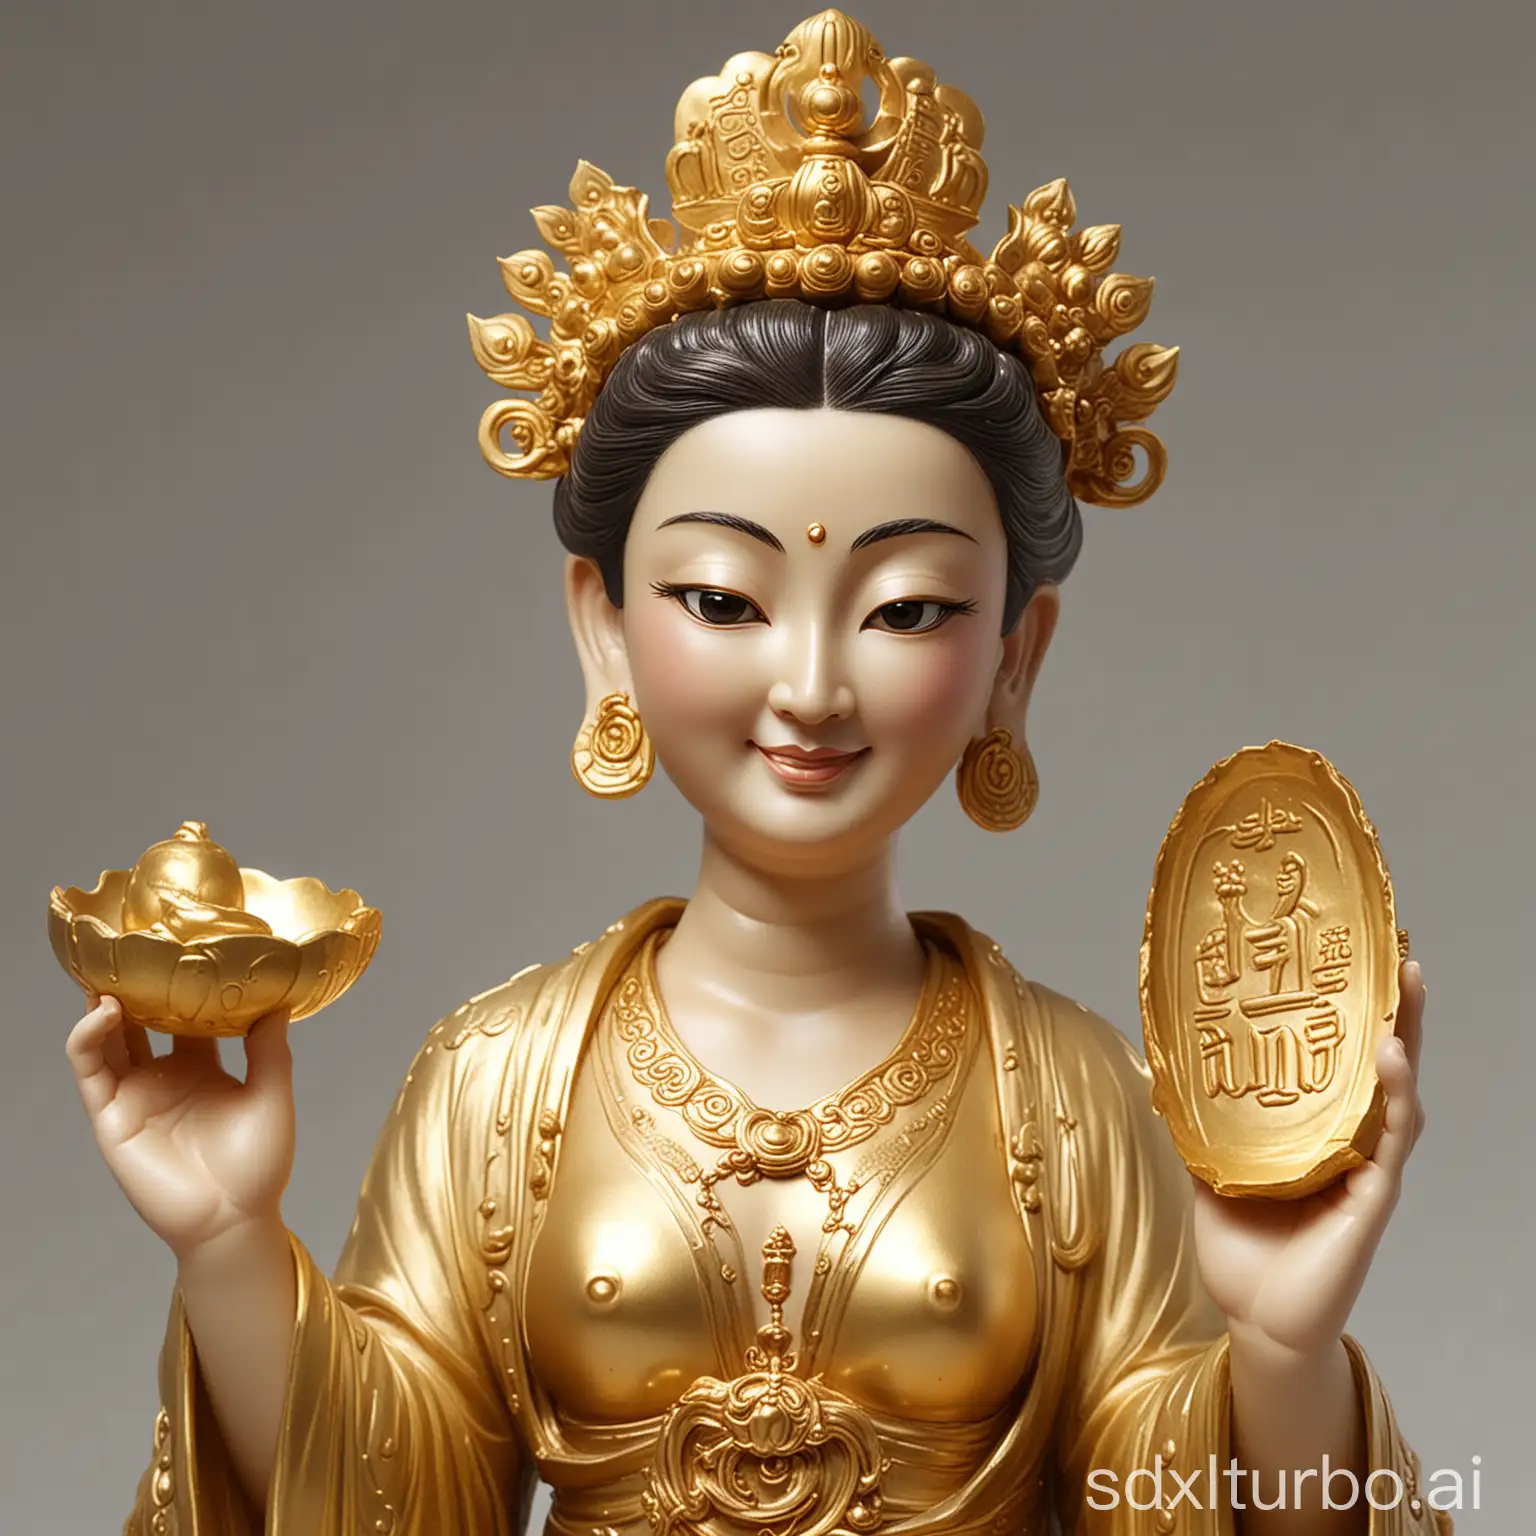 Guanyin Bodhisattva holds a golden ingot in both hands, with a kind face, big smiling eyes, large drooping ears, slightly solemn, delicate features.